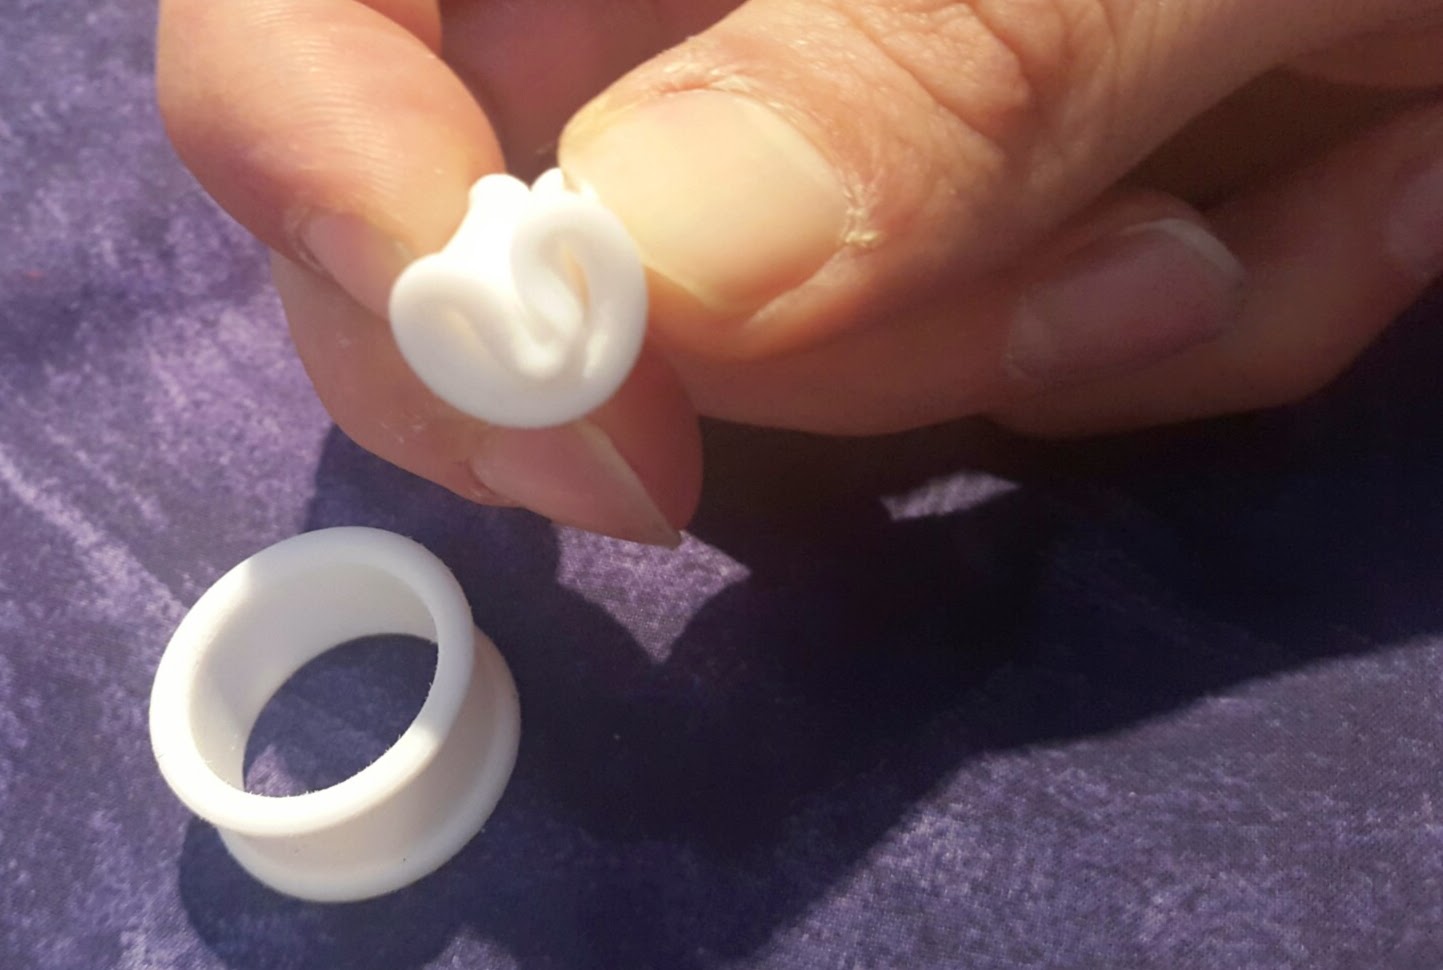 Folded phimocure ring